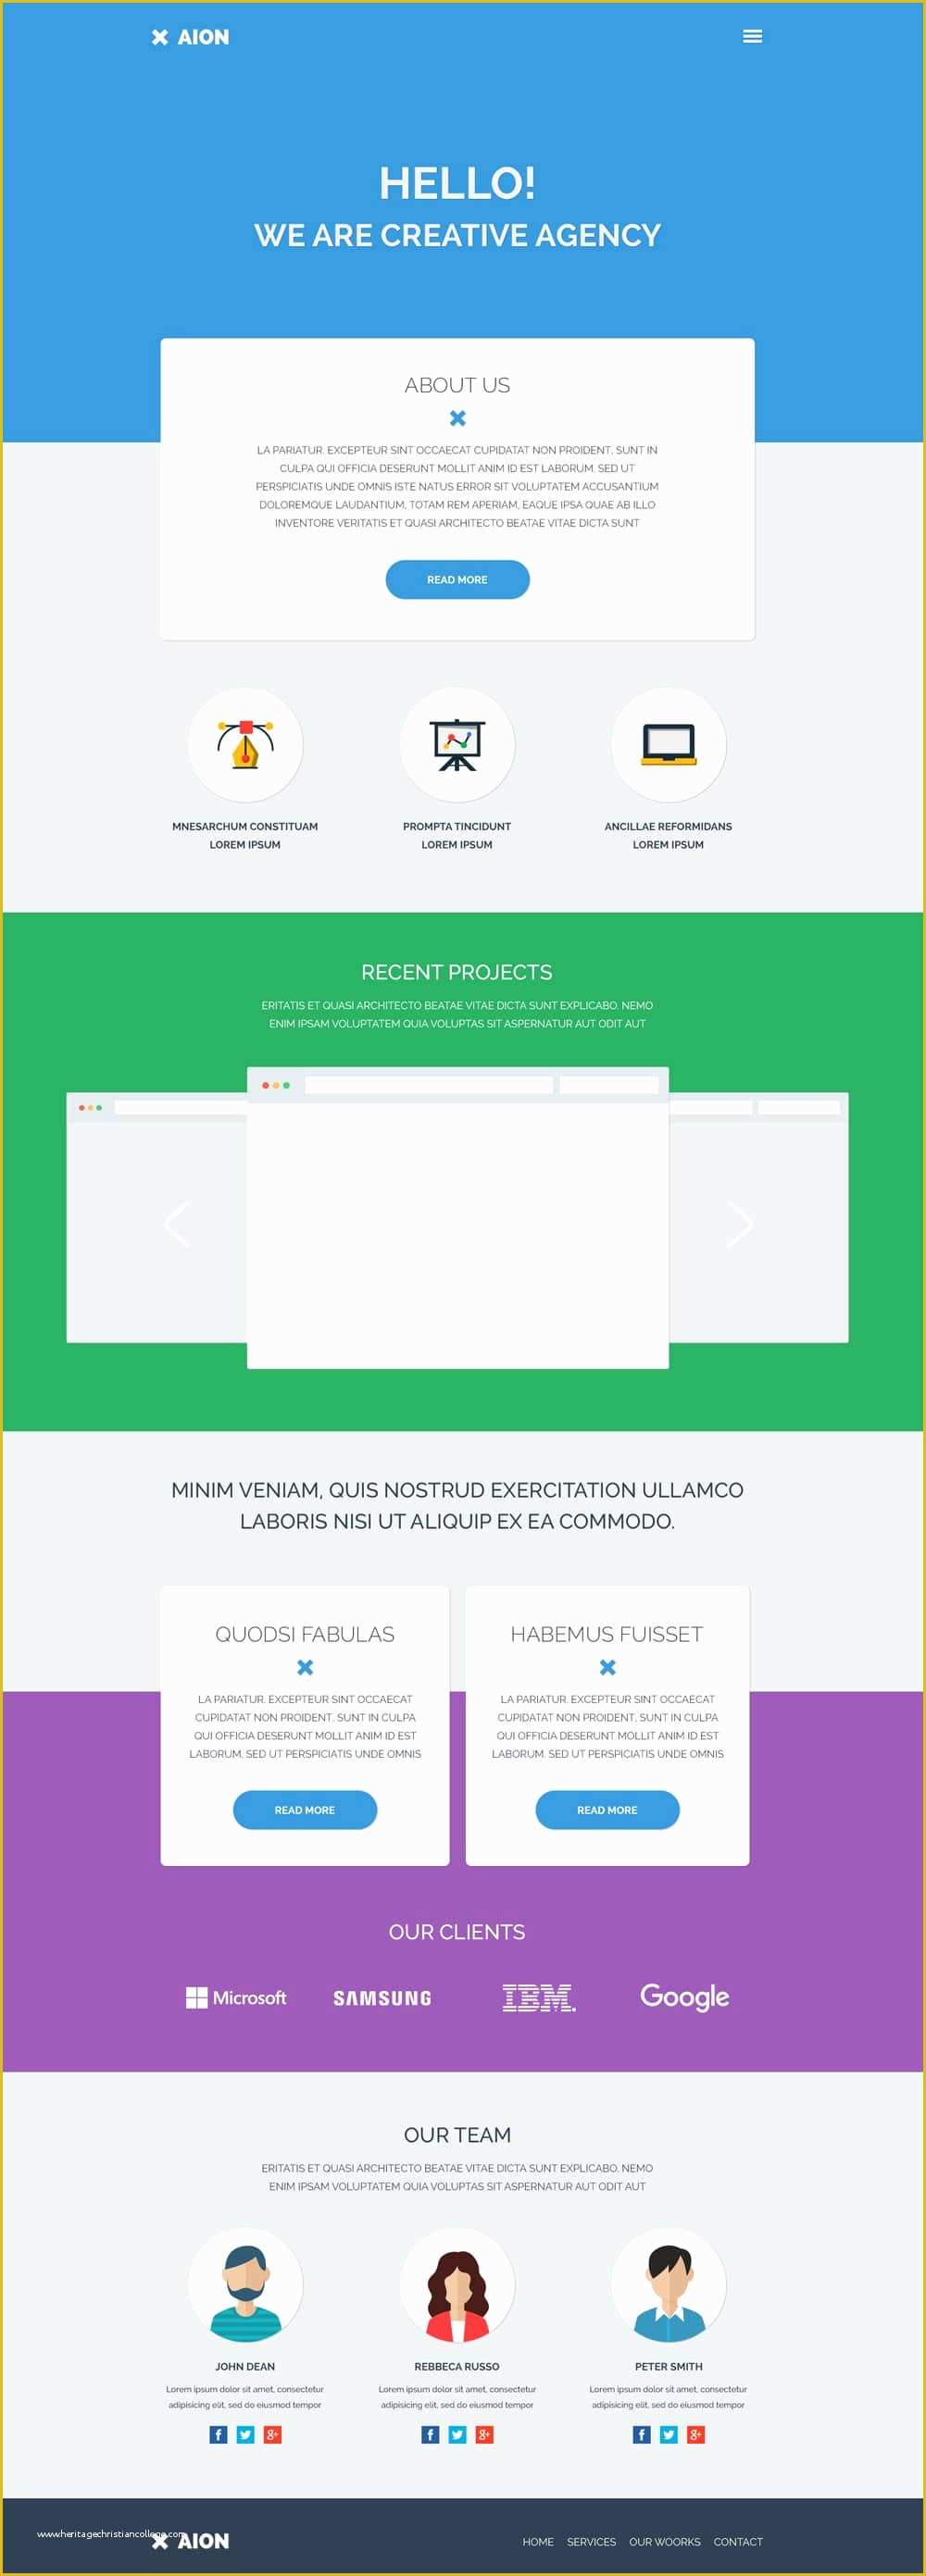 Free Psd Website Templates Of Free Corporate and Business Web Templates Psd